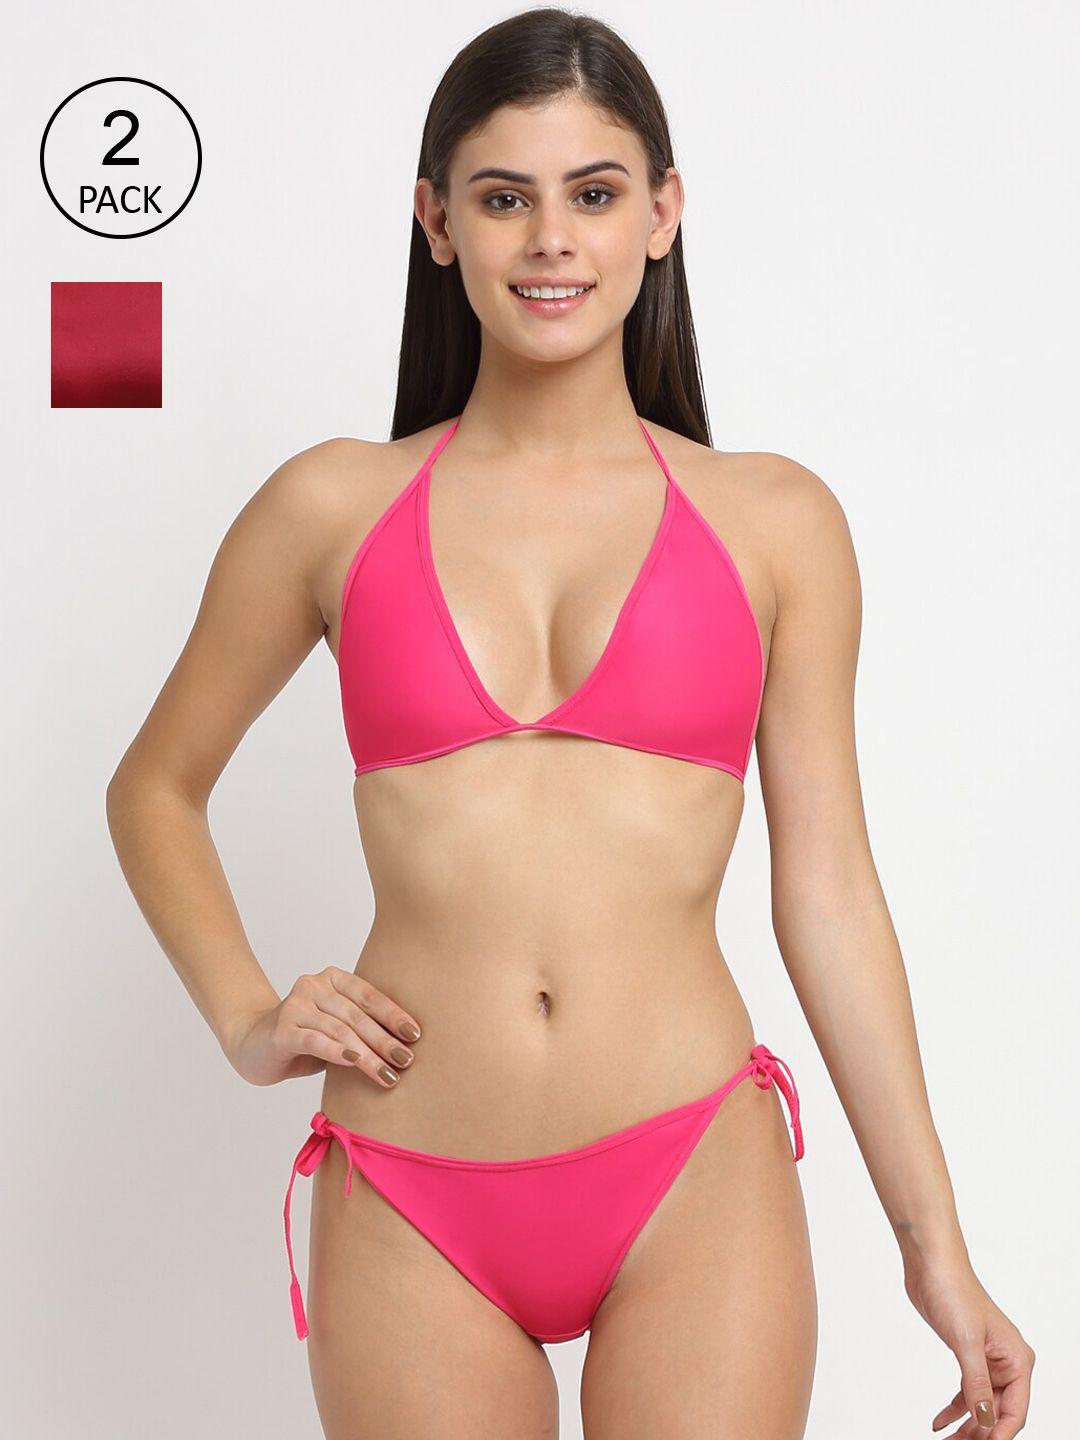 friskers pack of 2 maroon & pink non padded bikini sets